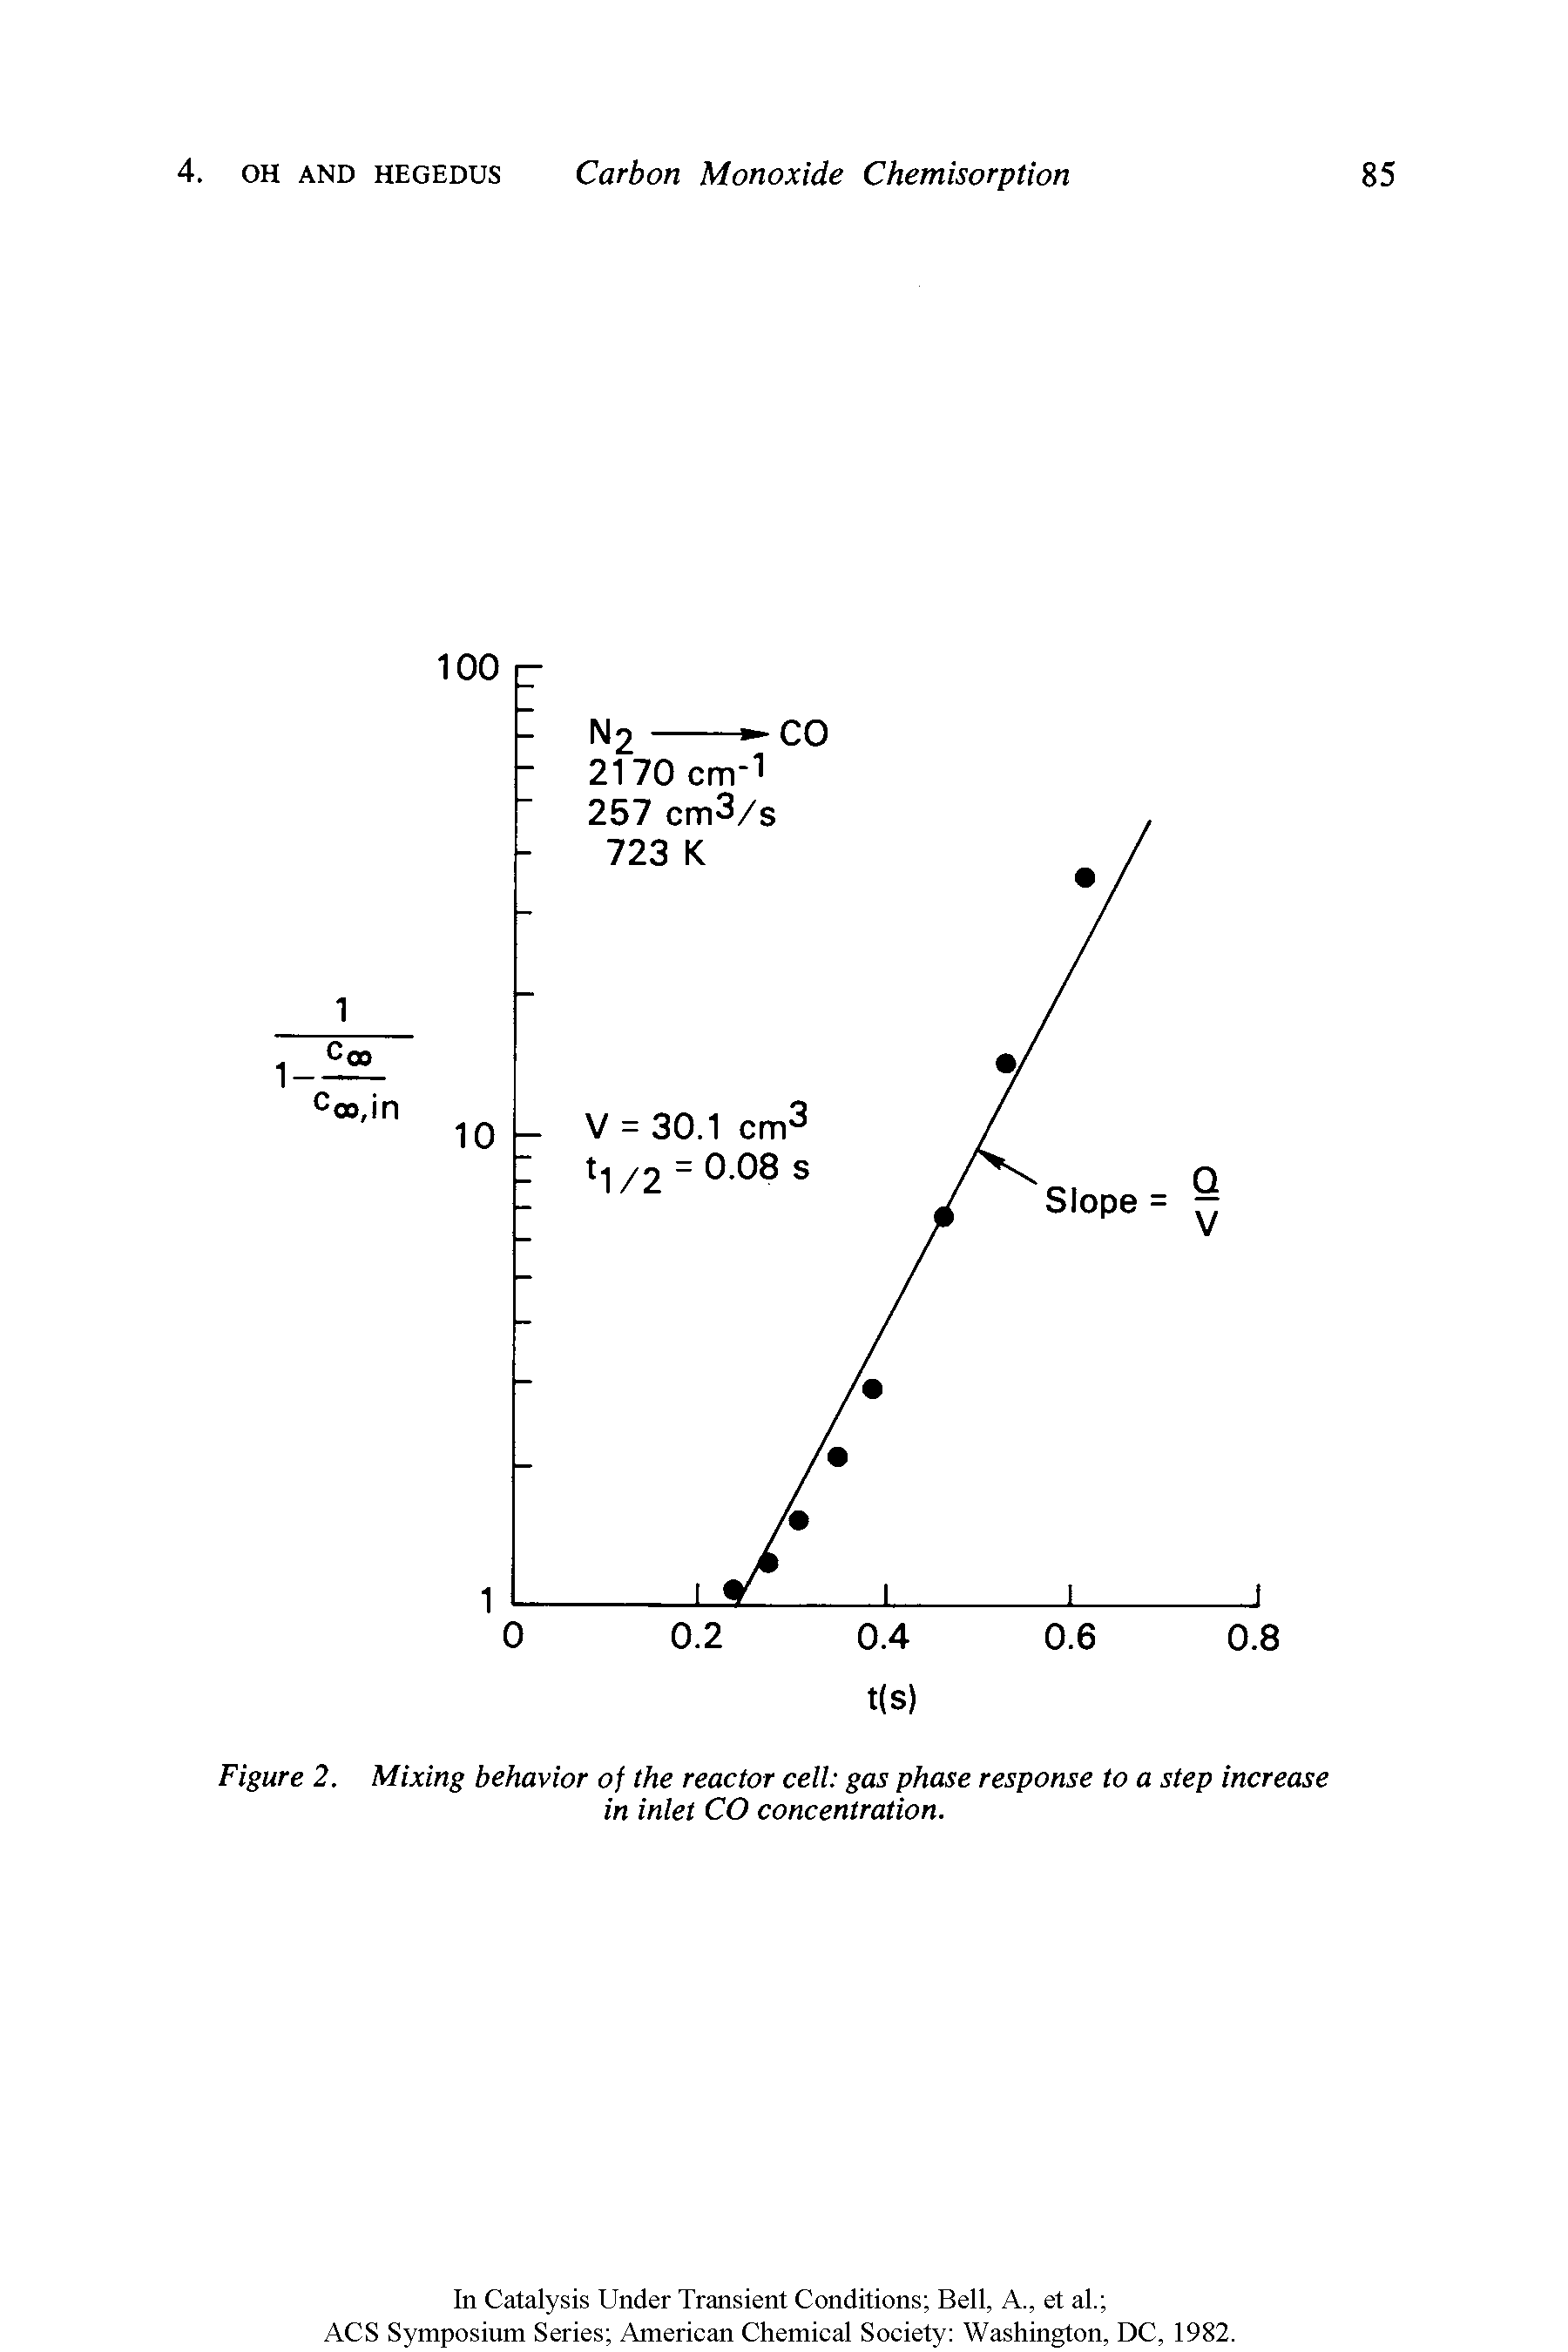 Figure 2. Mixing behavior of the reactor cell gas phase response to a step increase in inlet CO concentration.